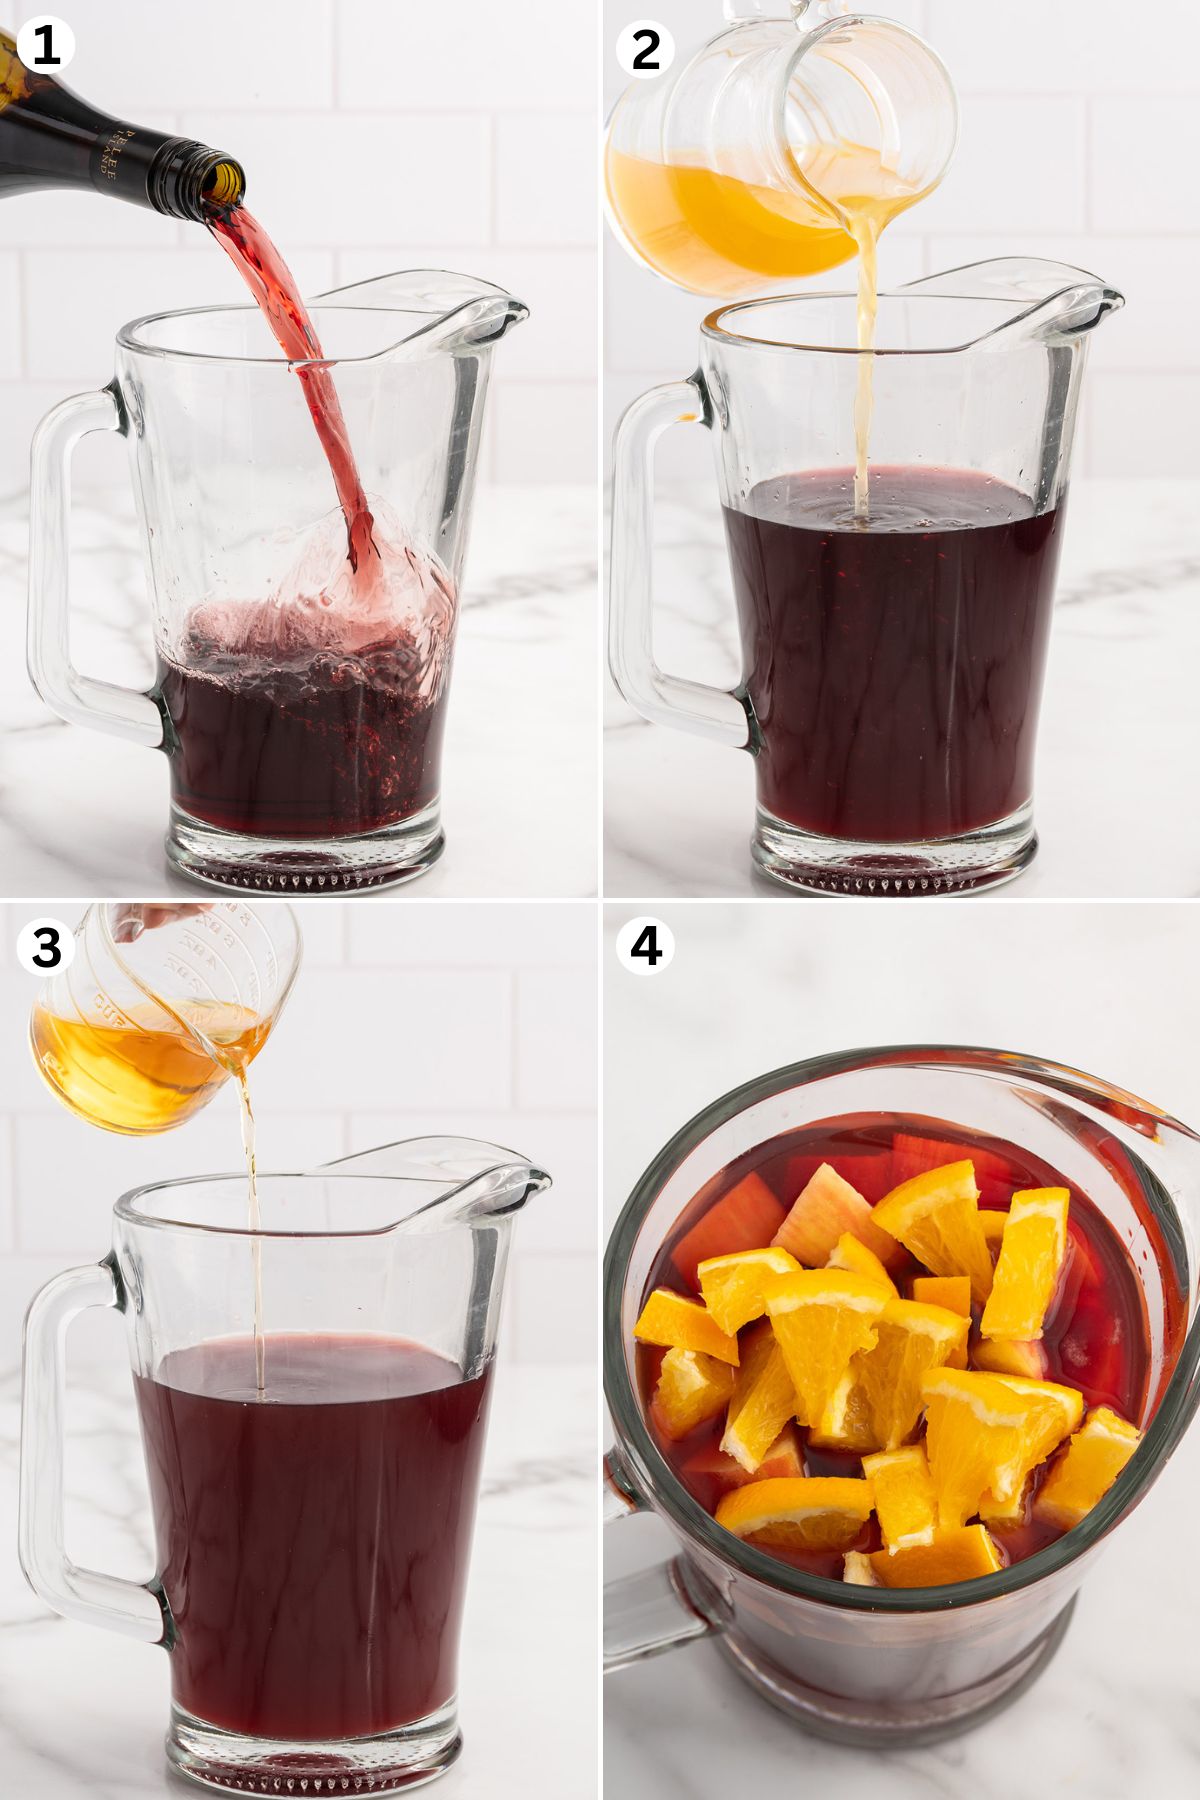 Pour the red wine into the pitcher. Add the apple cider. Add the Fireball Whiskey. Pour the Triple-Sec and add orange pieces.